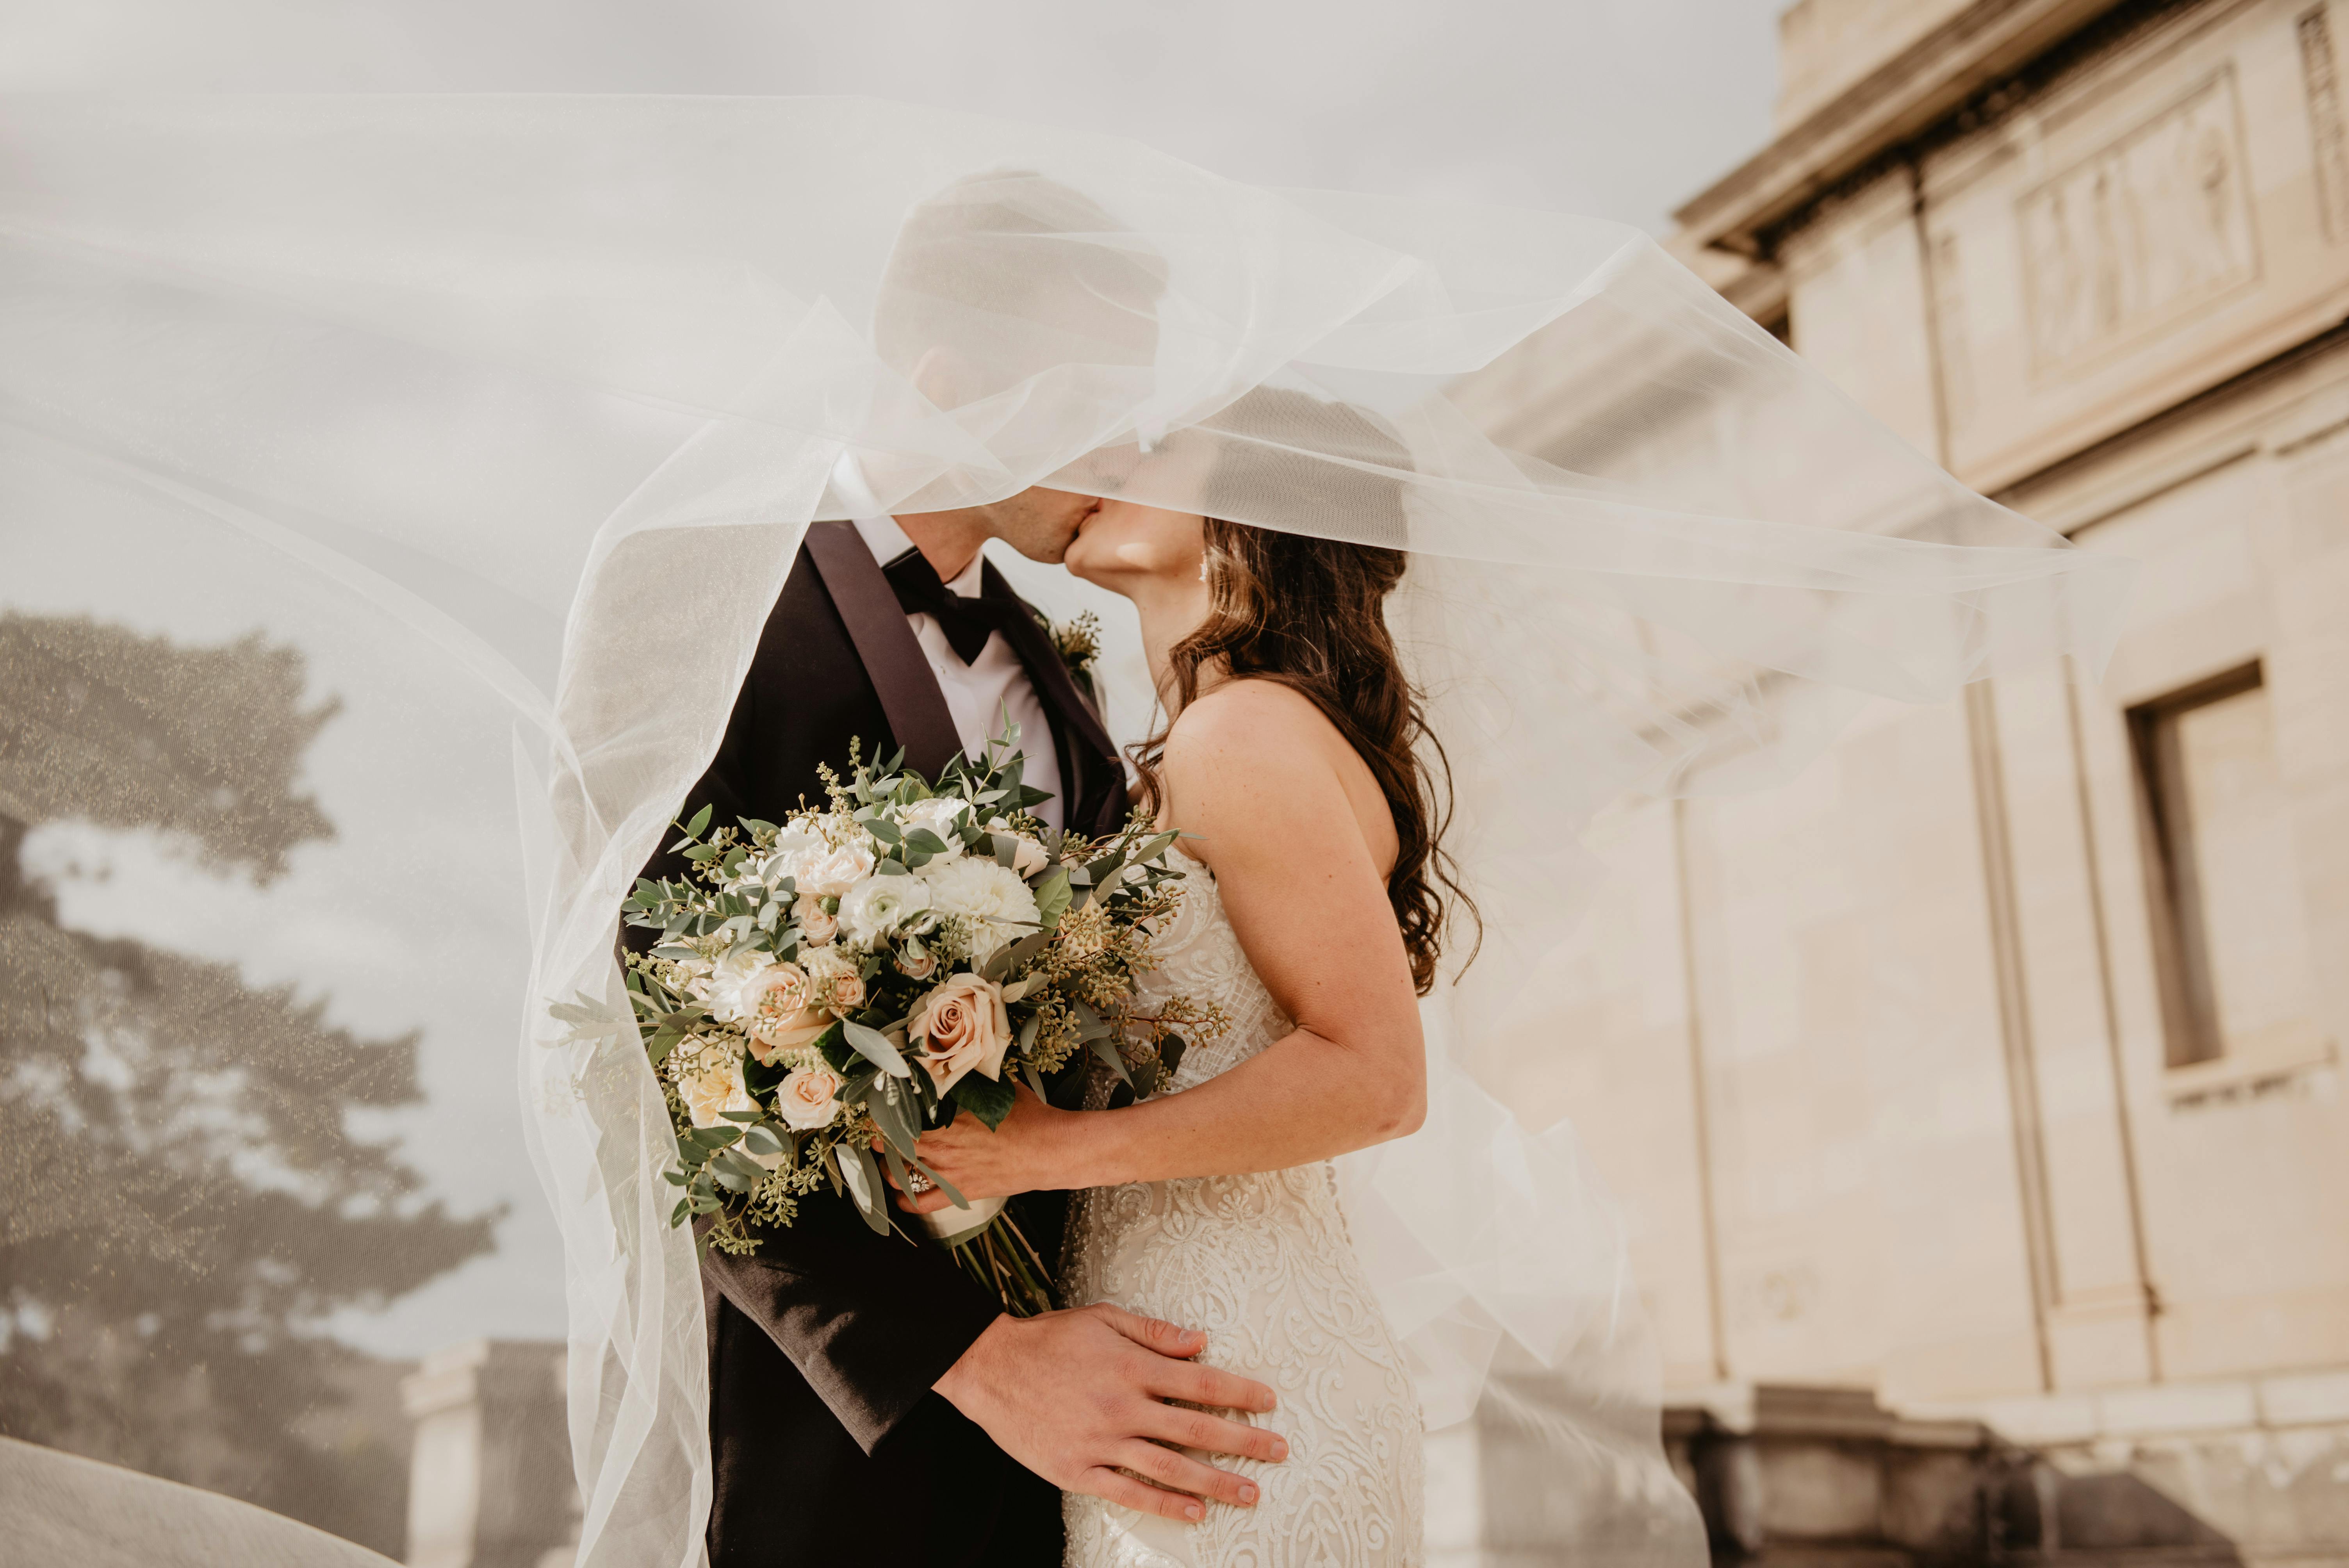 Newlyweds for illustration purposes only | Source: Pexels